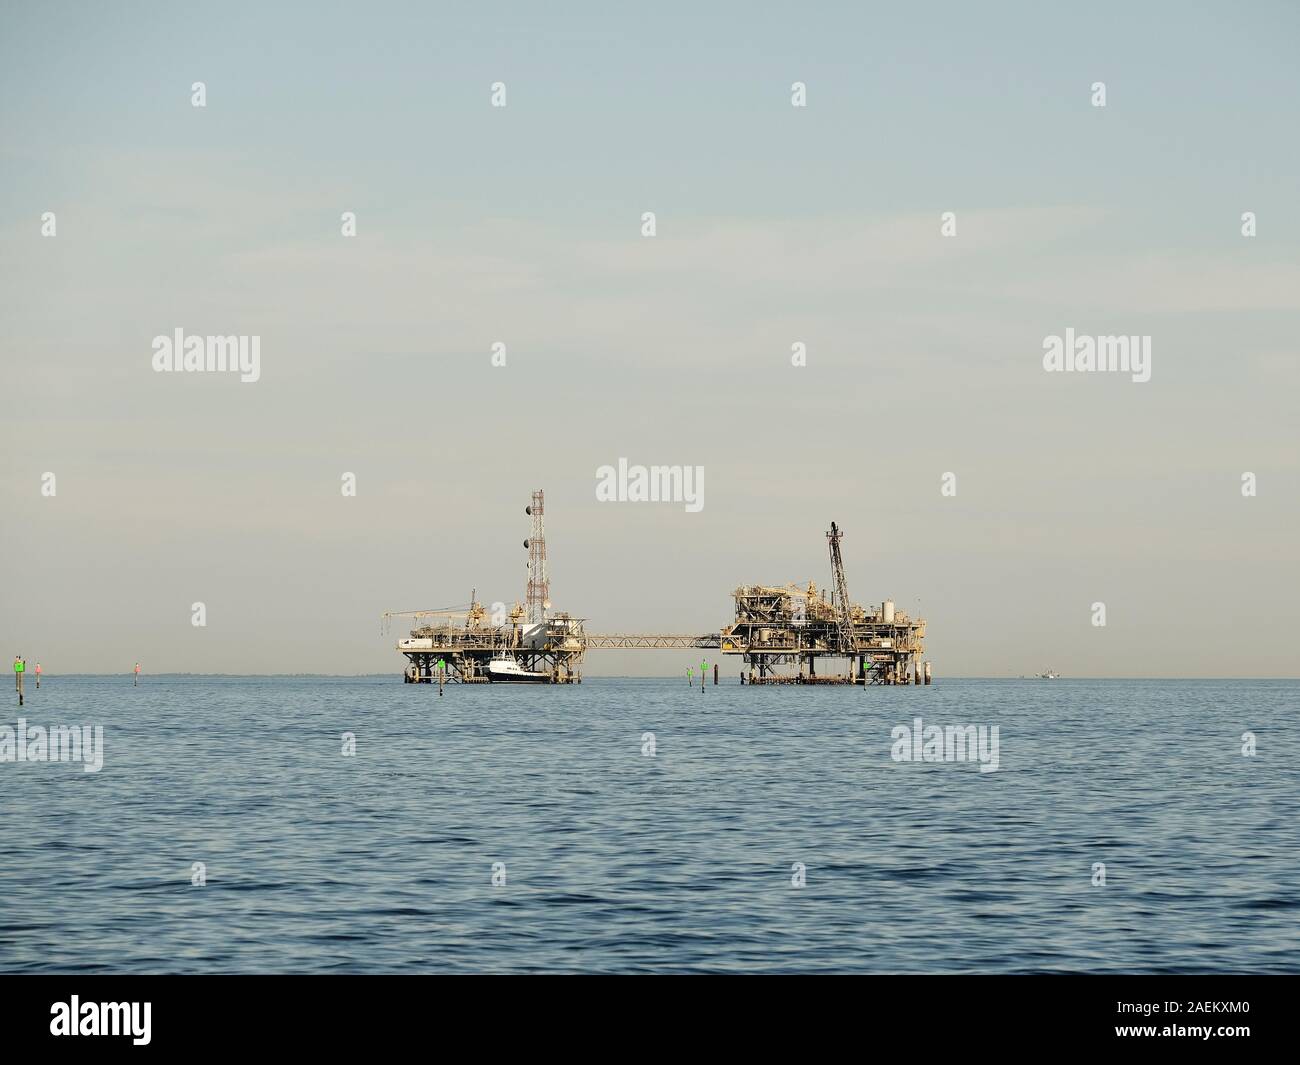 Offshore oil and gas drilling platform or rig in the Gulf of Mexico off the coast of Alabama, USA. Stock Photo